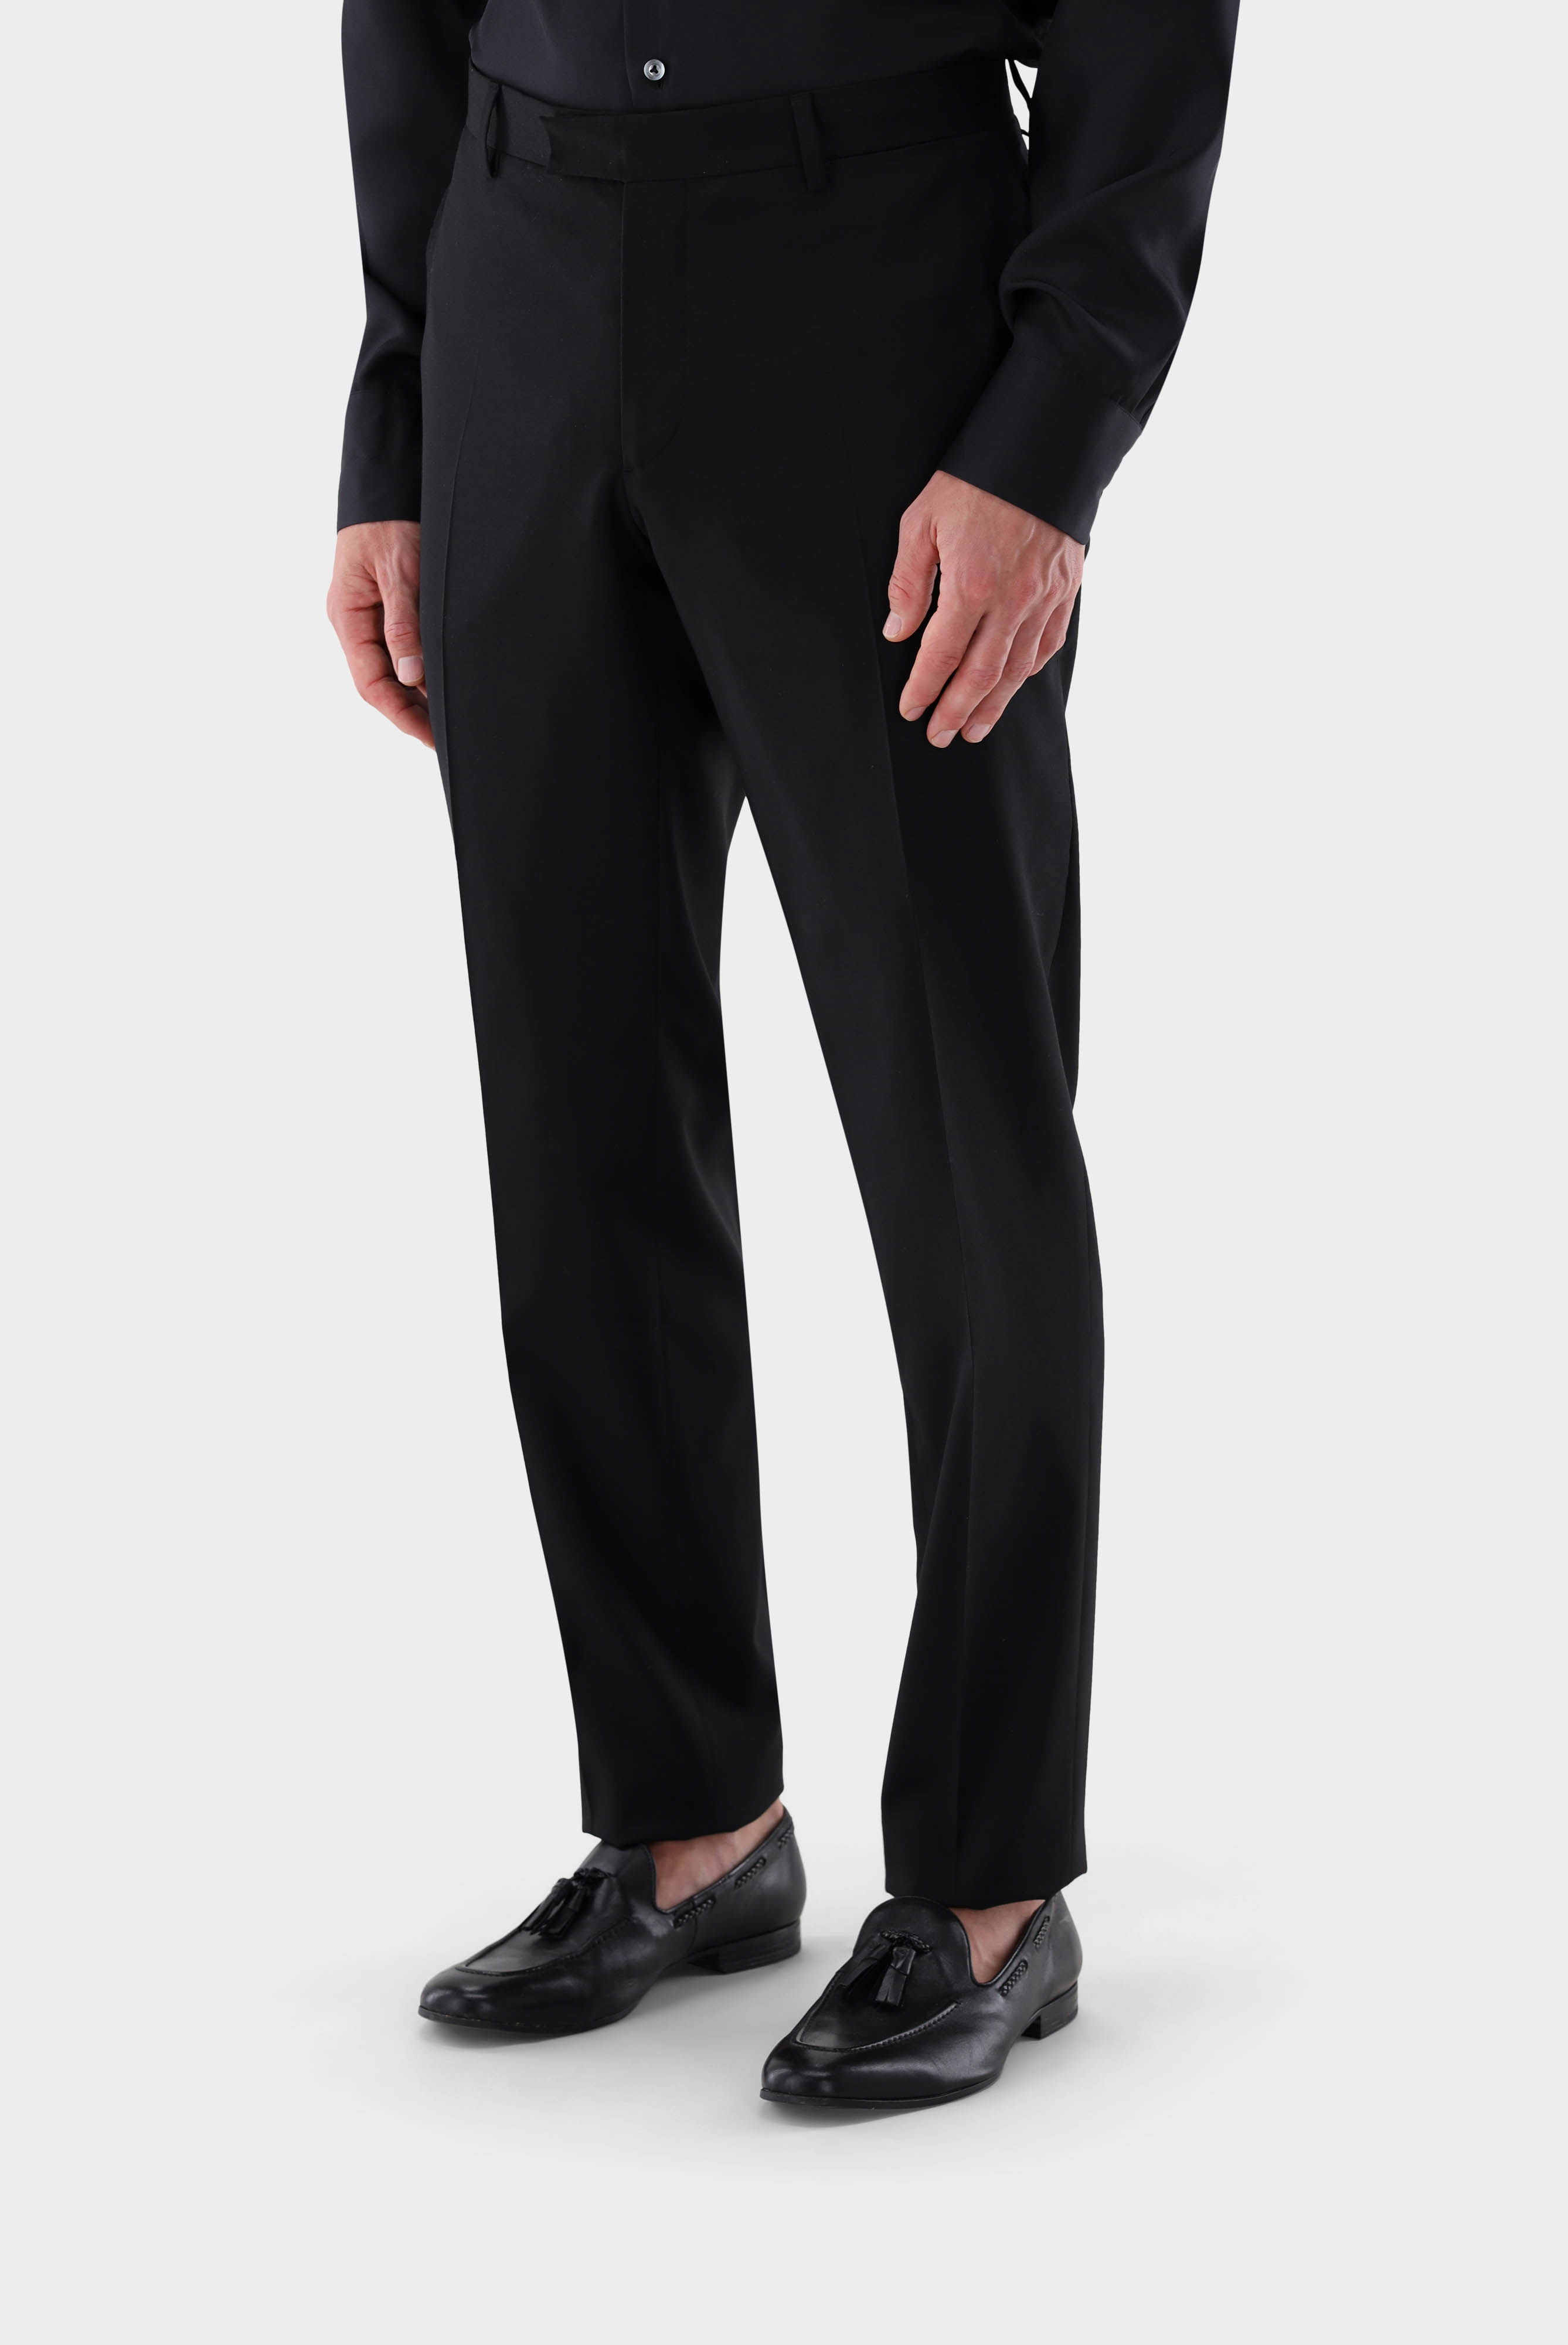 Jeans & Trousers+Wool Trousers Slim Fit+20.7880.16.H01010.099.102